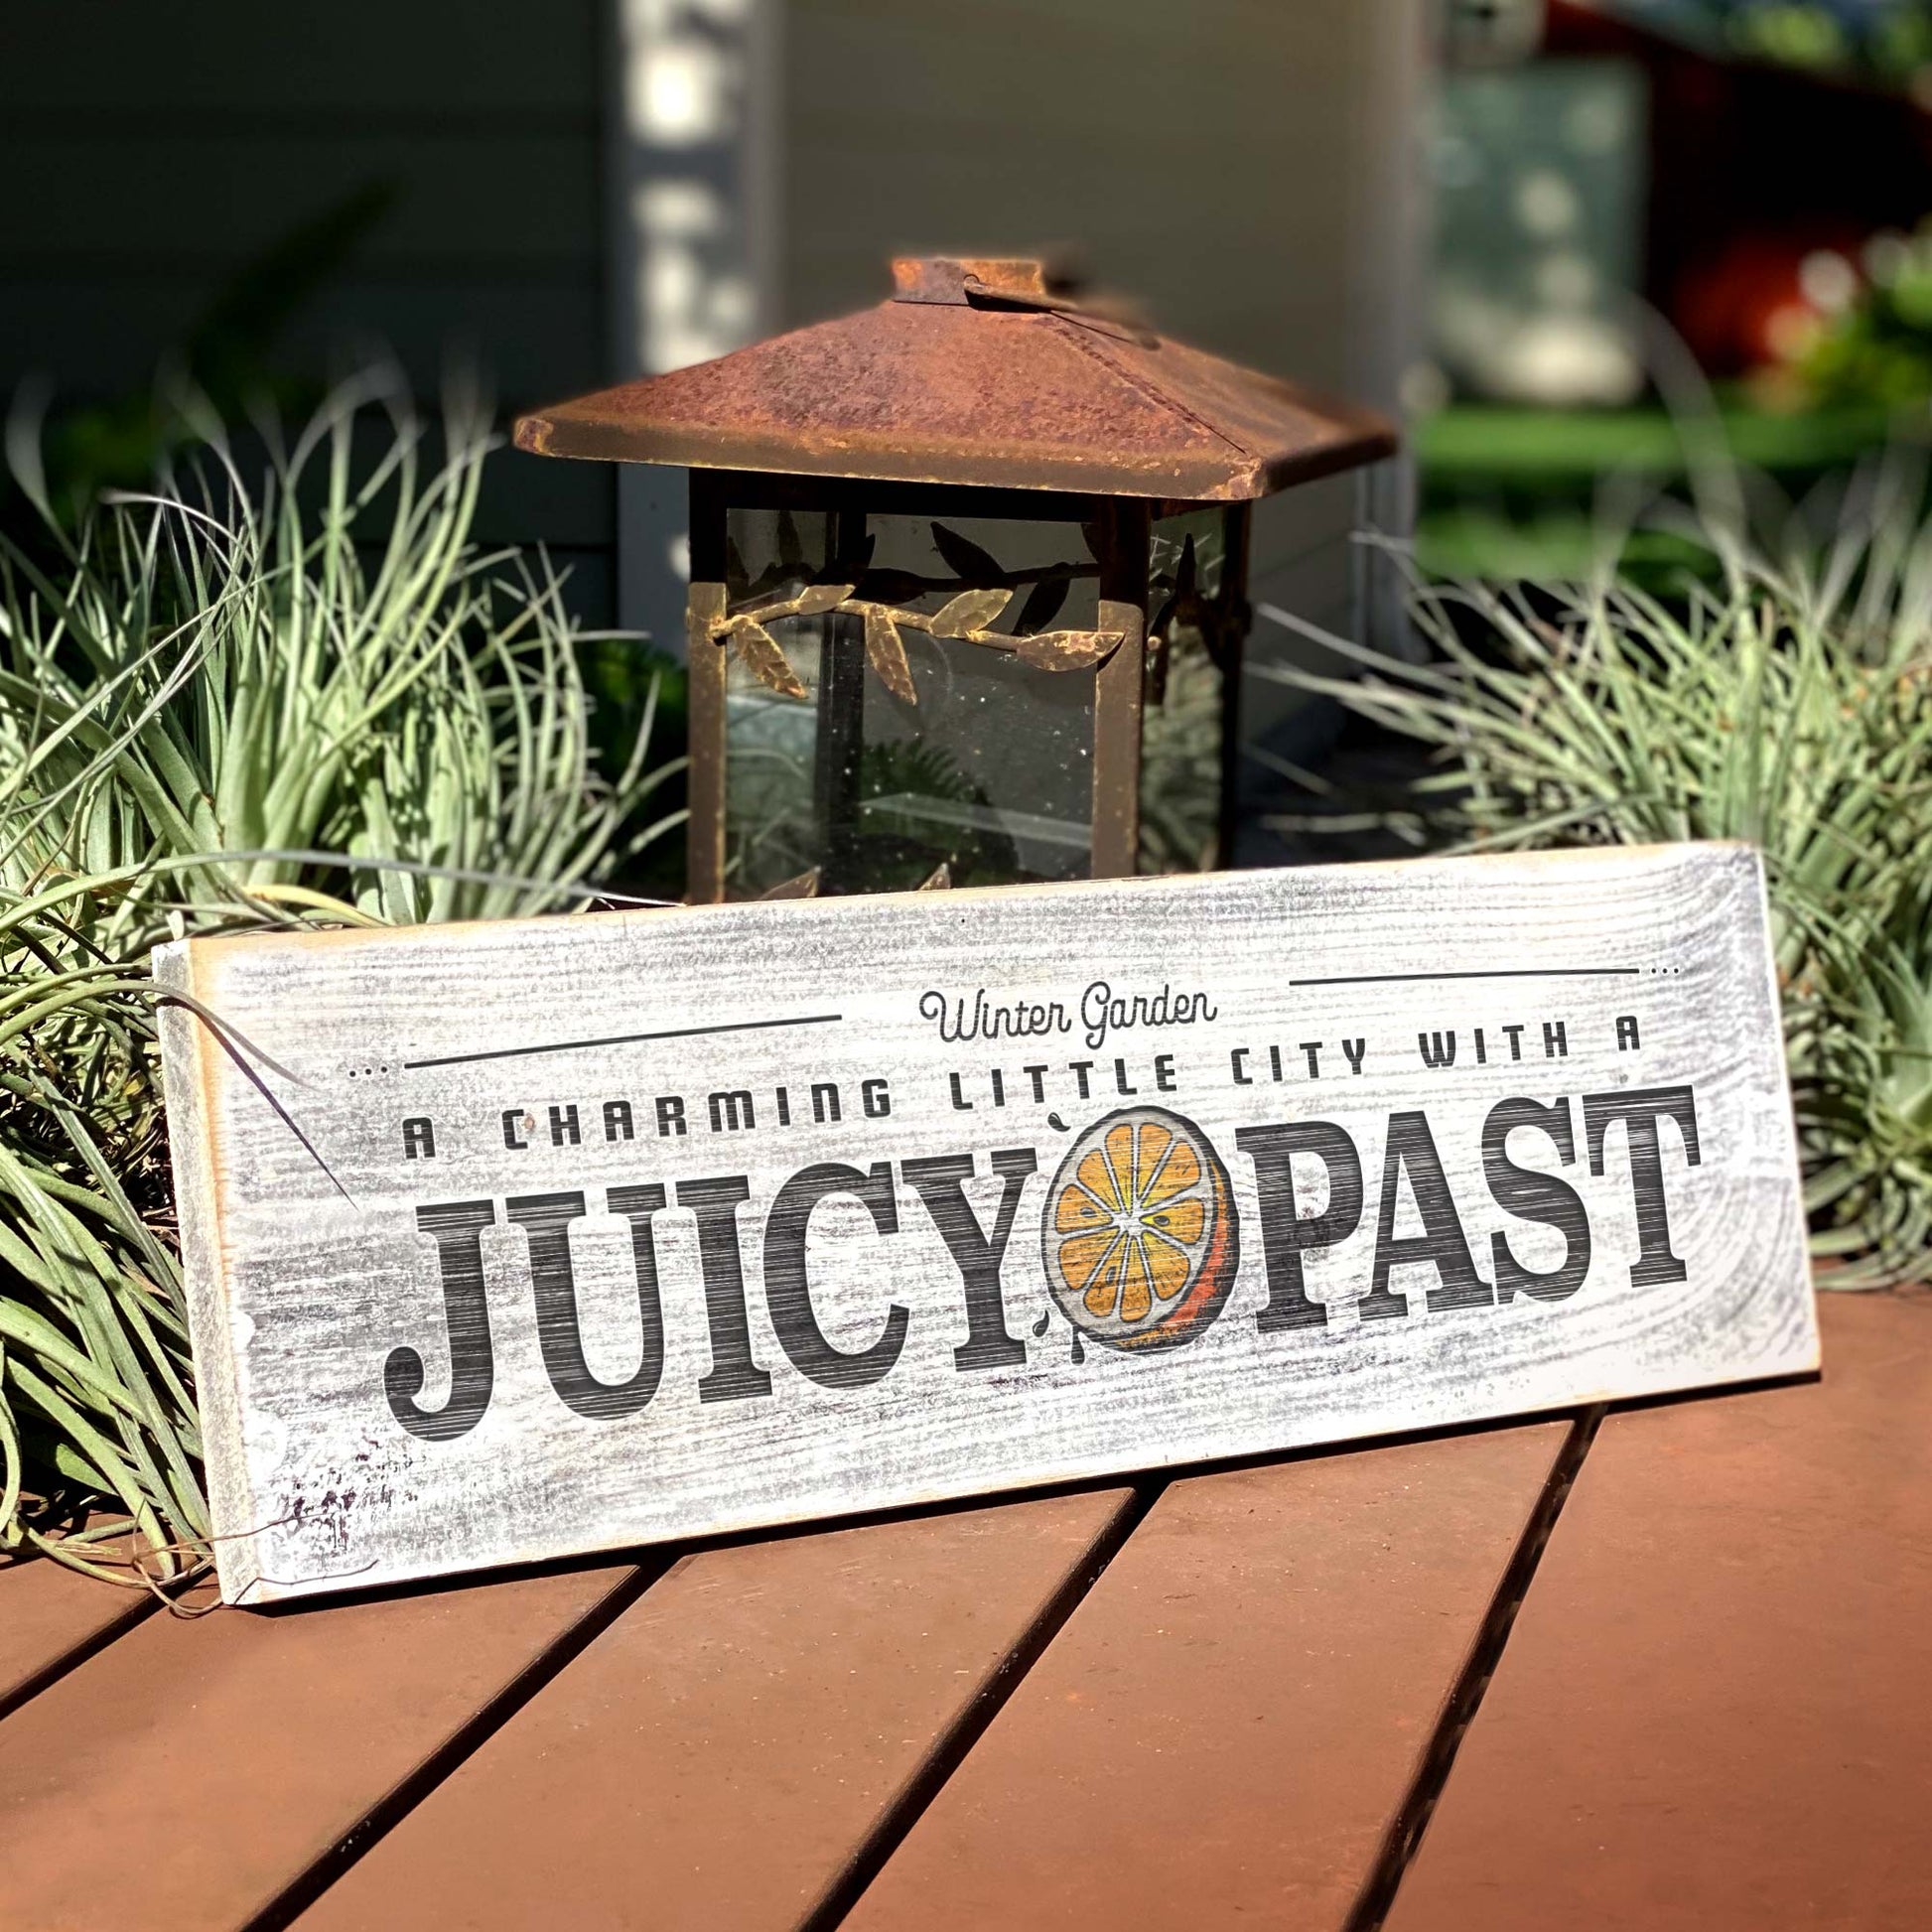 Winter Garden Juicy Past - Handcrafted Artisan Wood Sign - A. B. Newton and Company